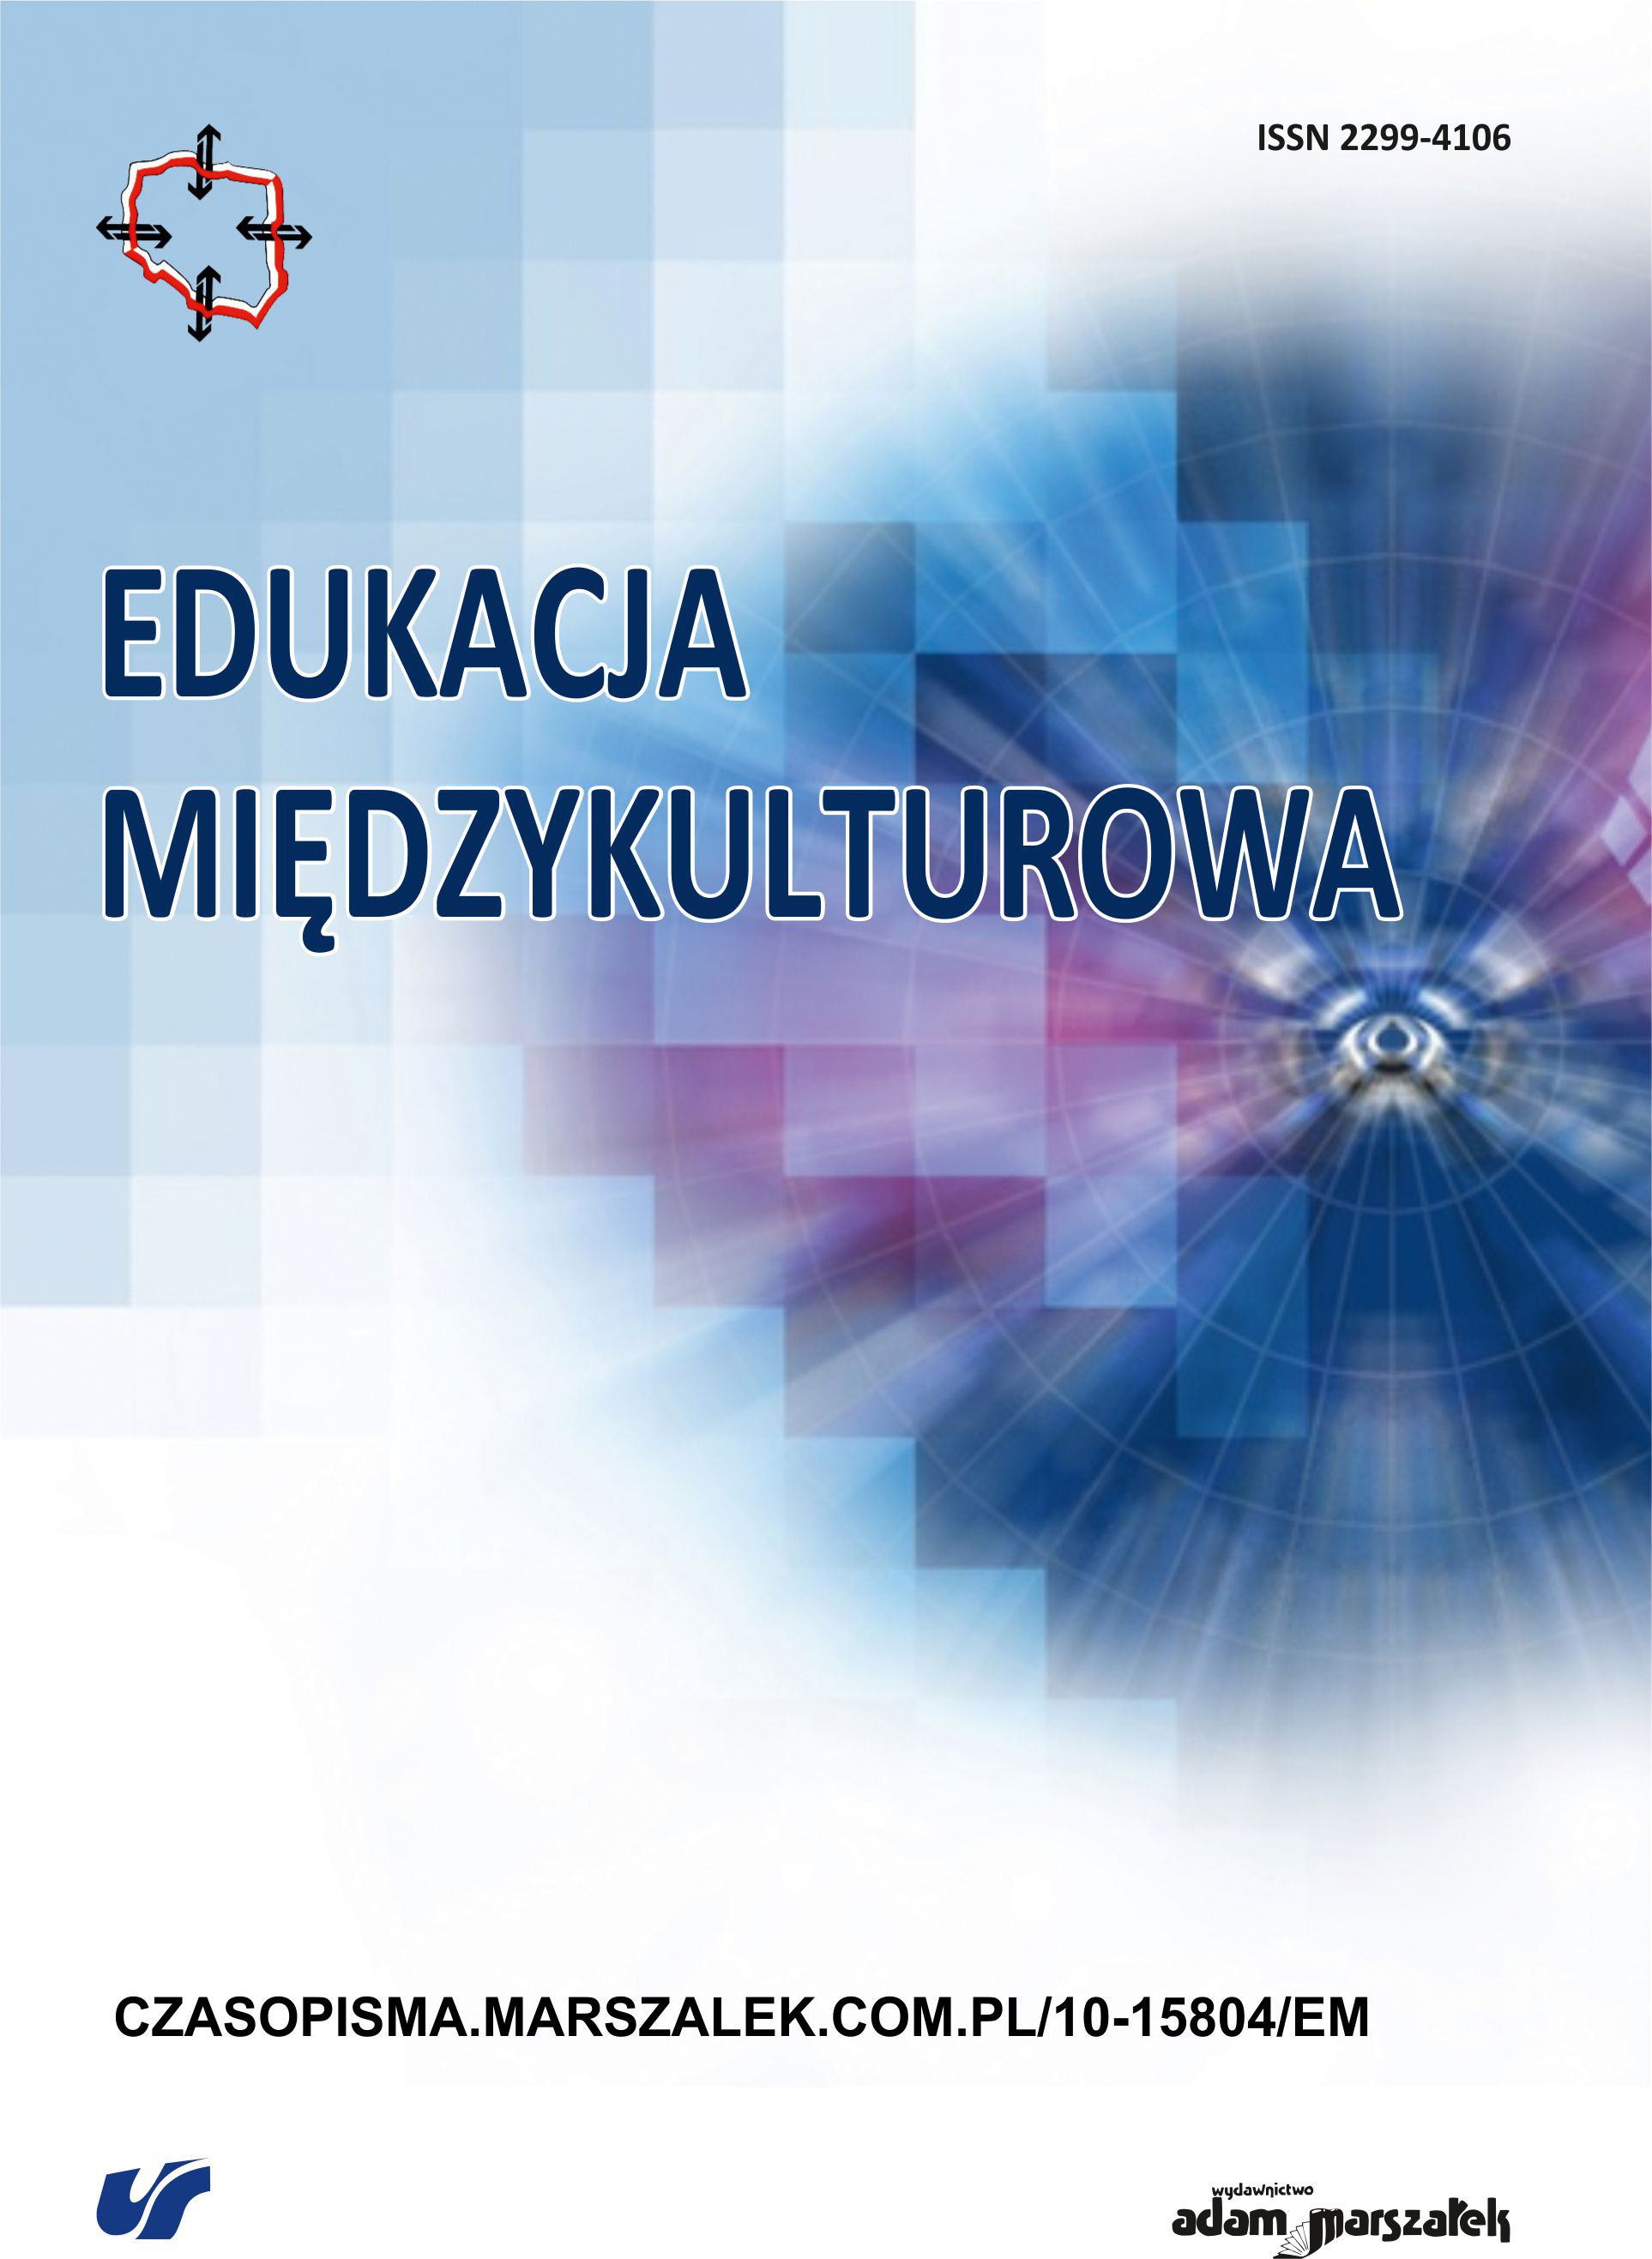 A culturally diverse school in Poland. Experiences of Bydgoszcz teachers in the first period of the war in Ukraine Cover Image